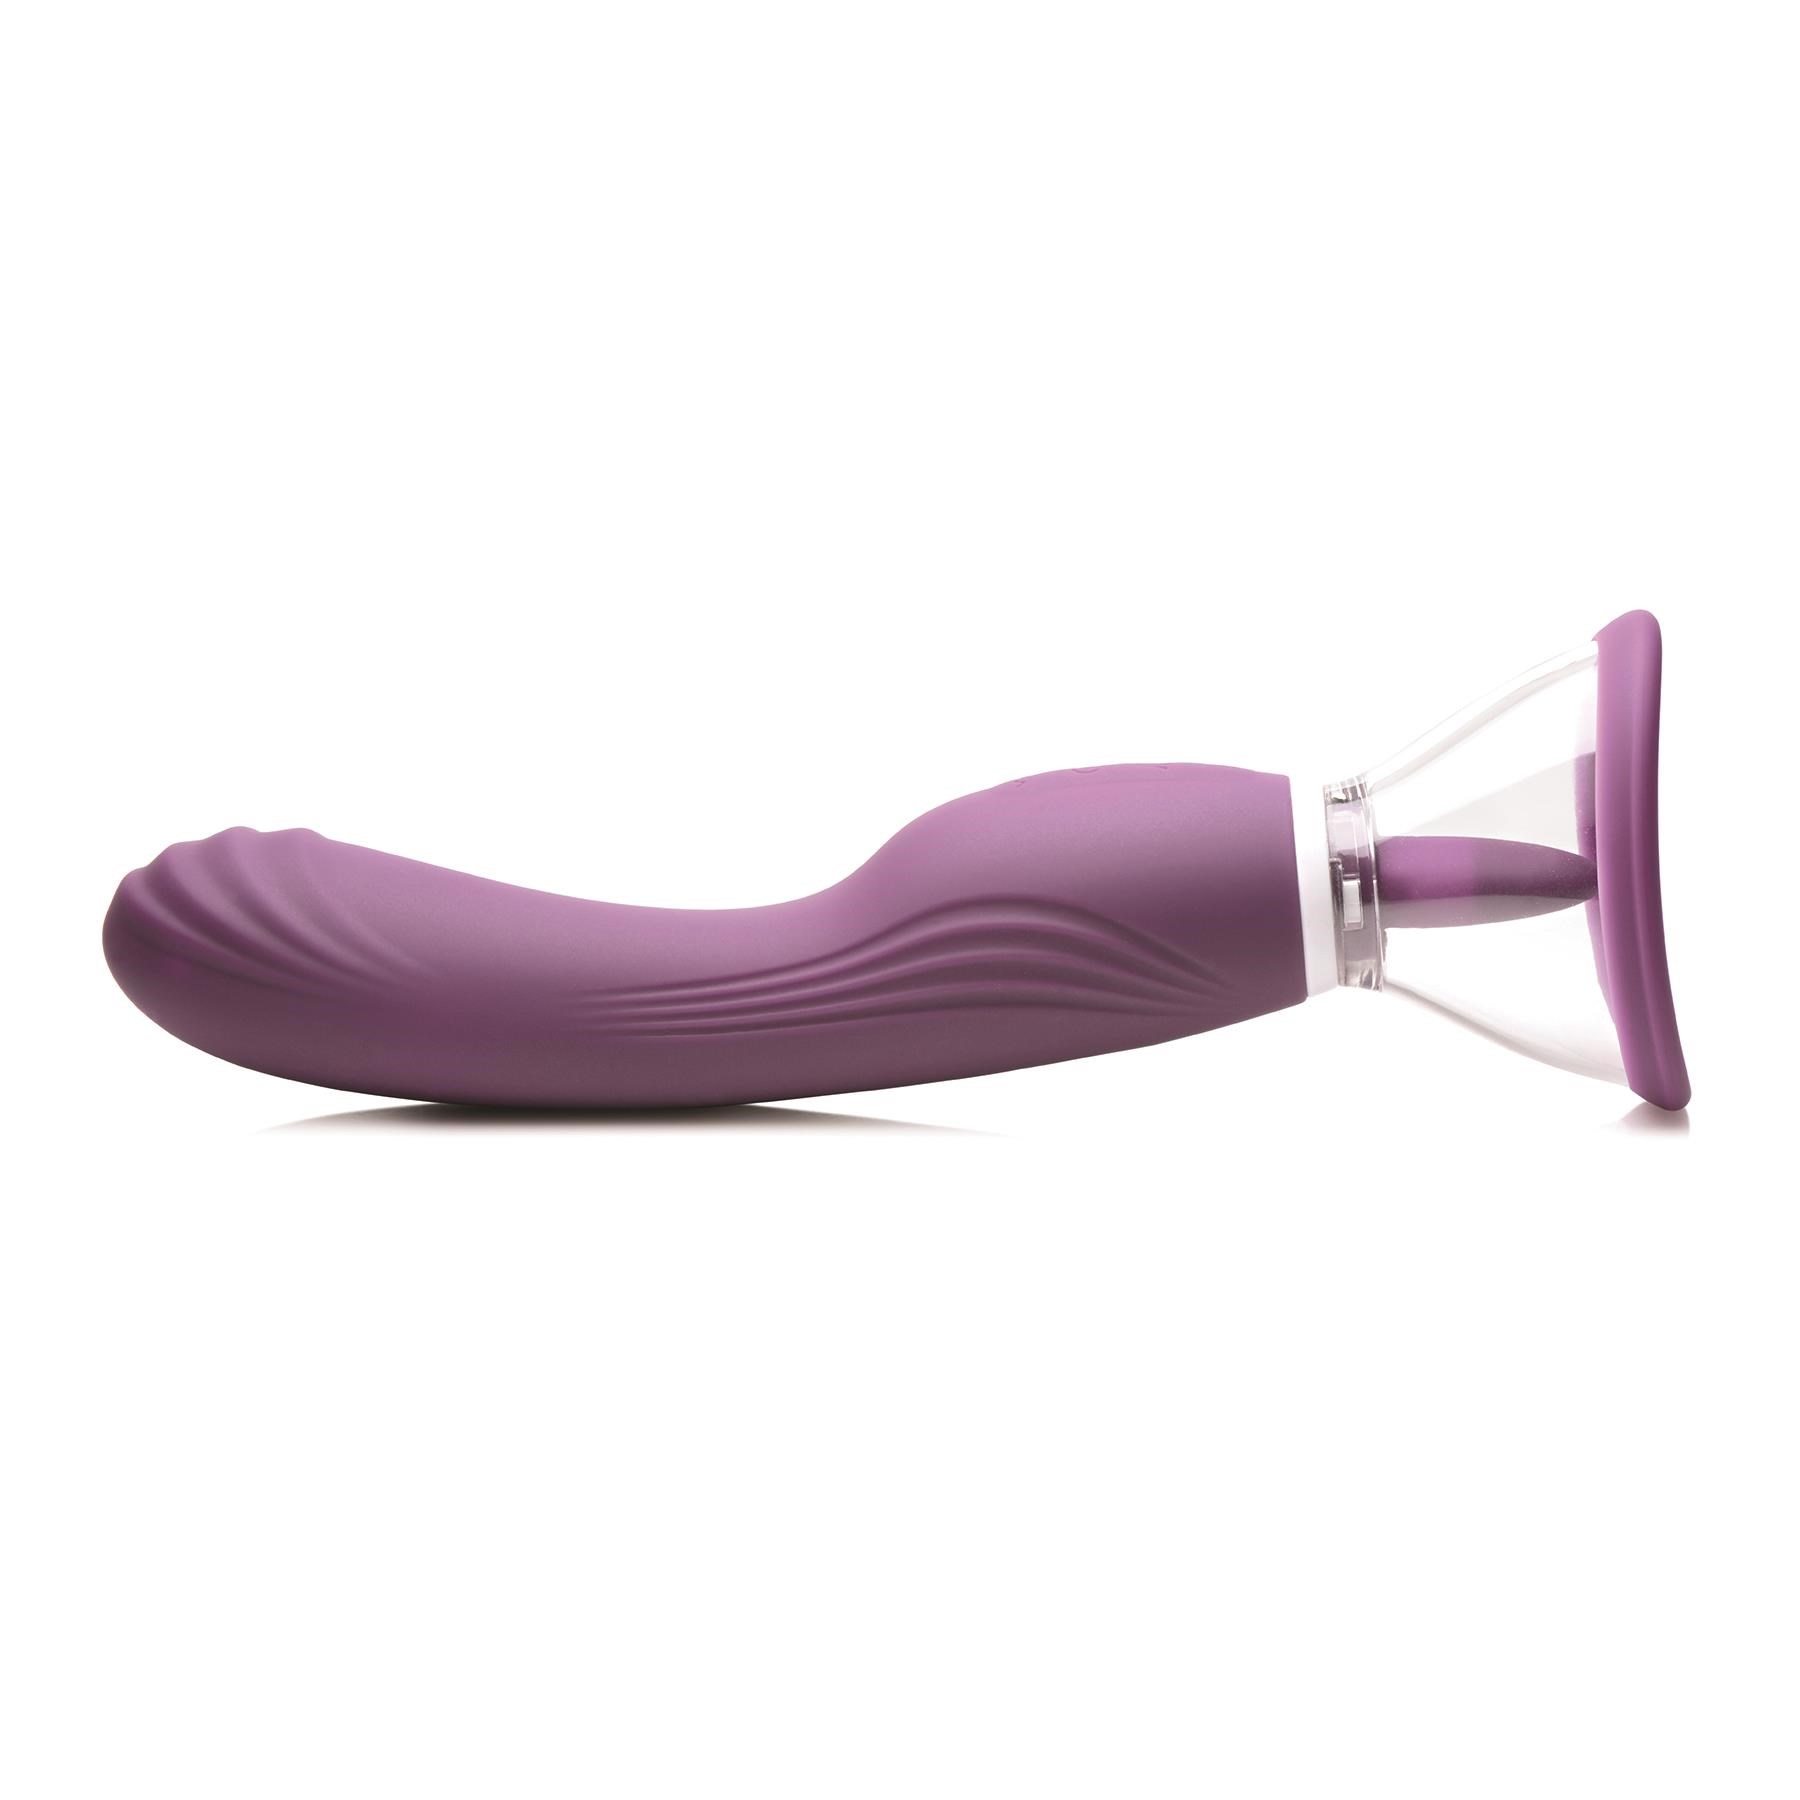 Shegasm Lickgasm Vibrating Pussy Pump - Side Shot with Large Cup